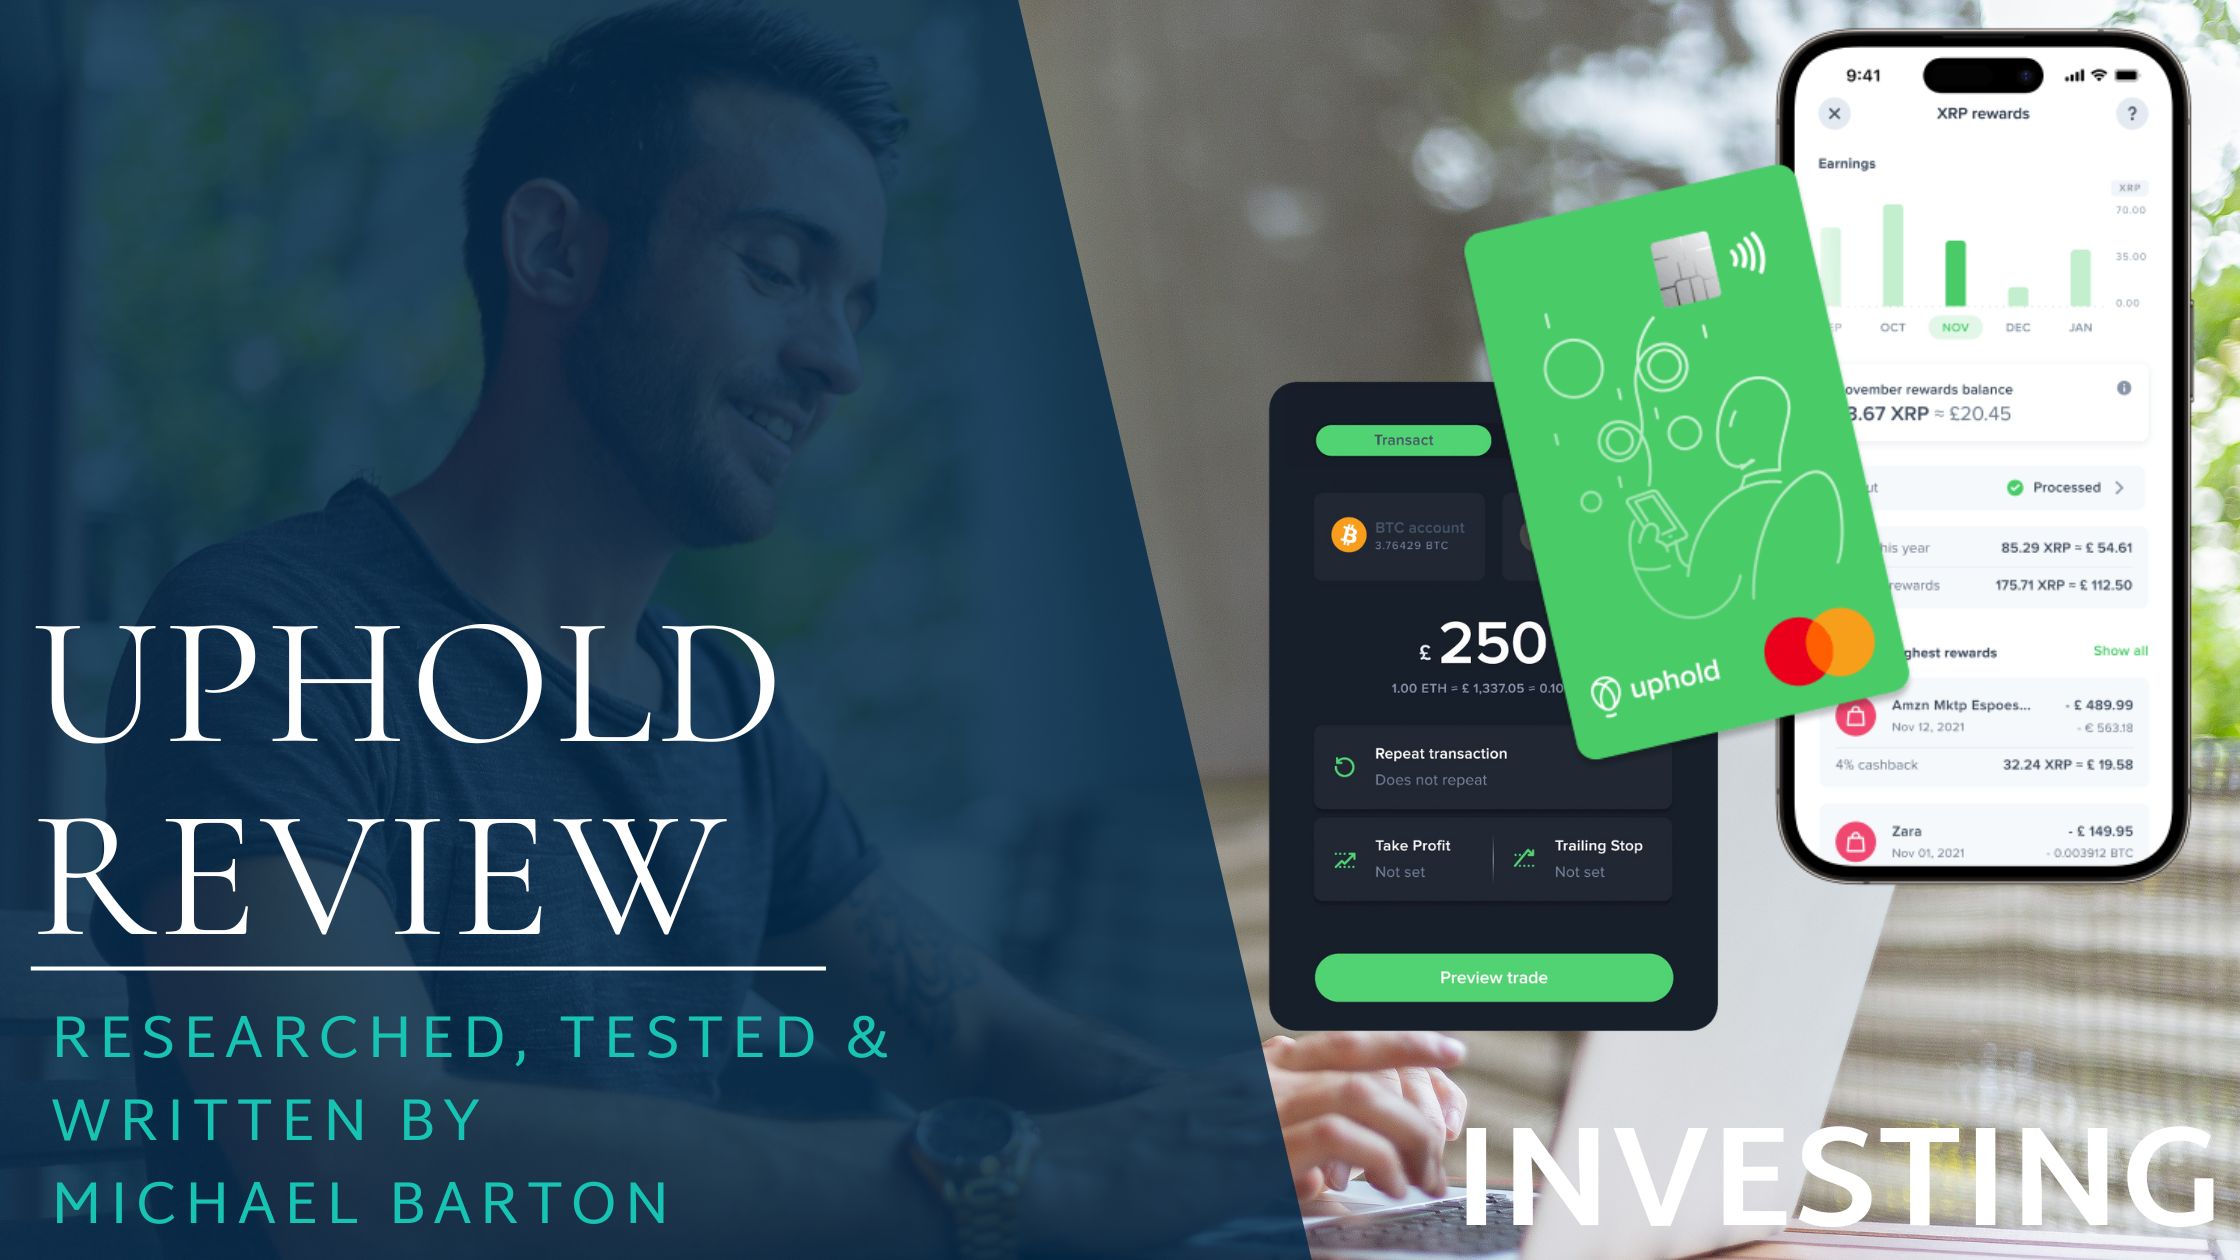 Uphold Review feature image